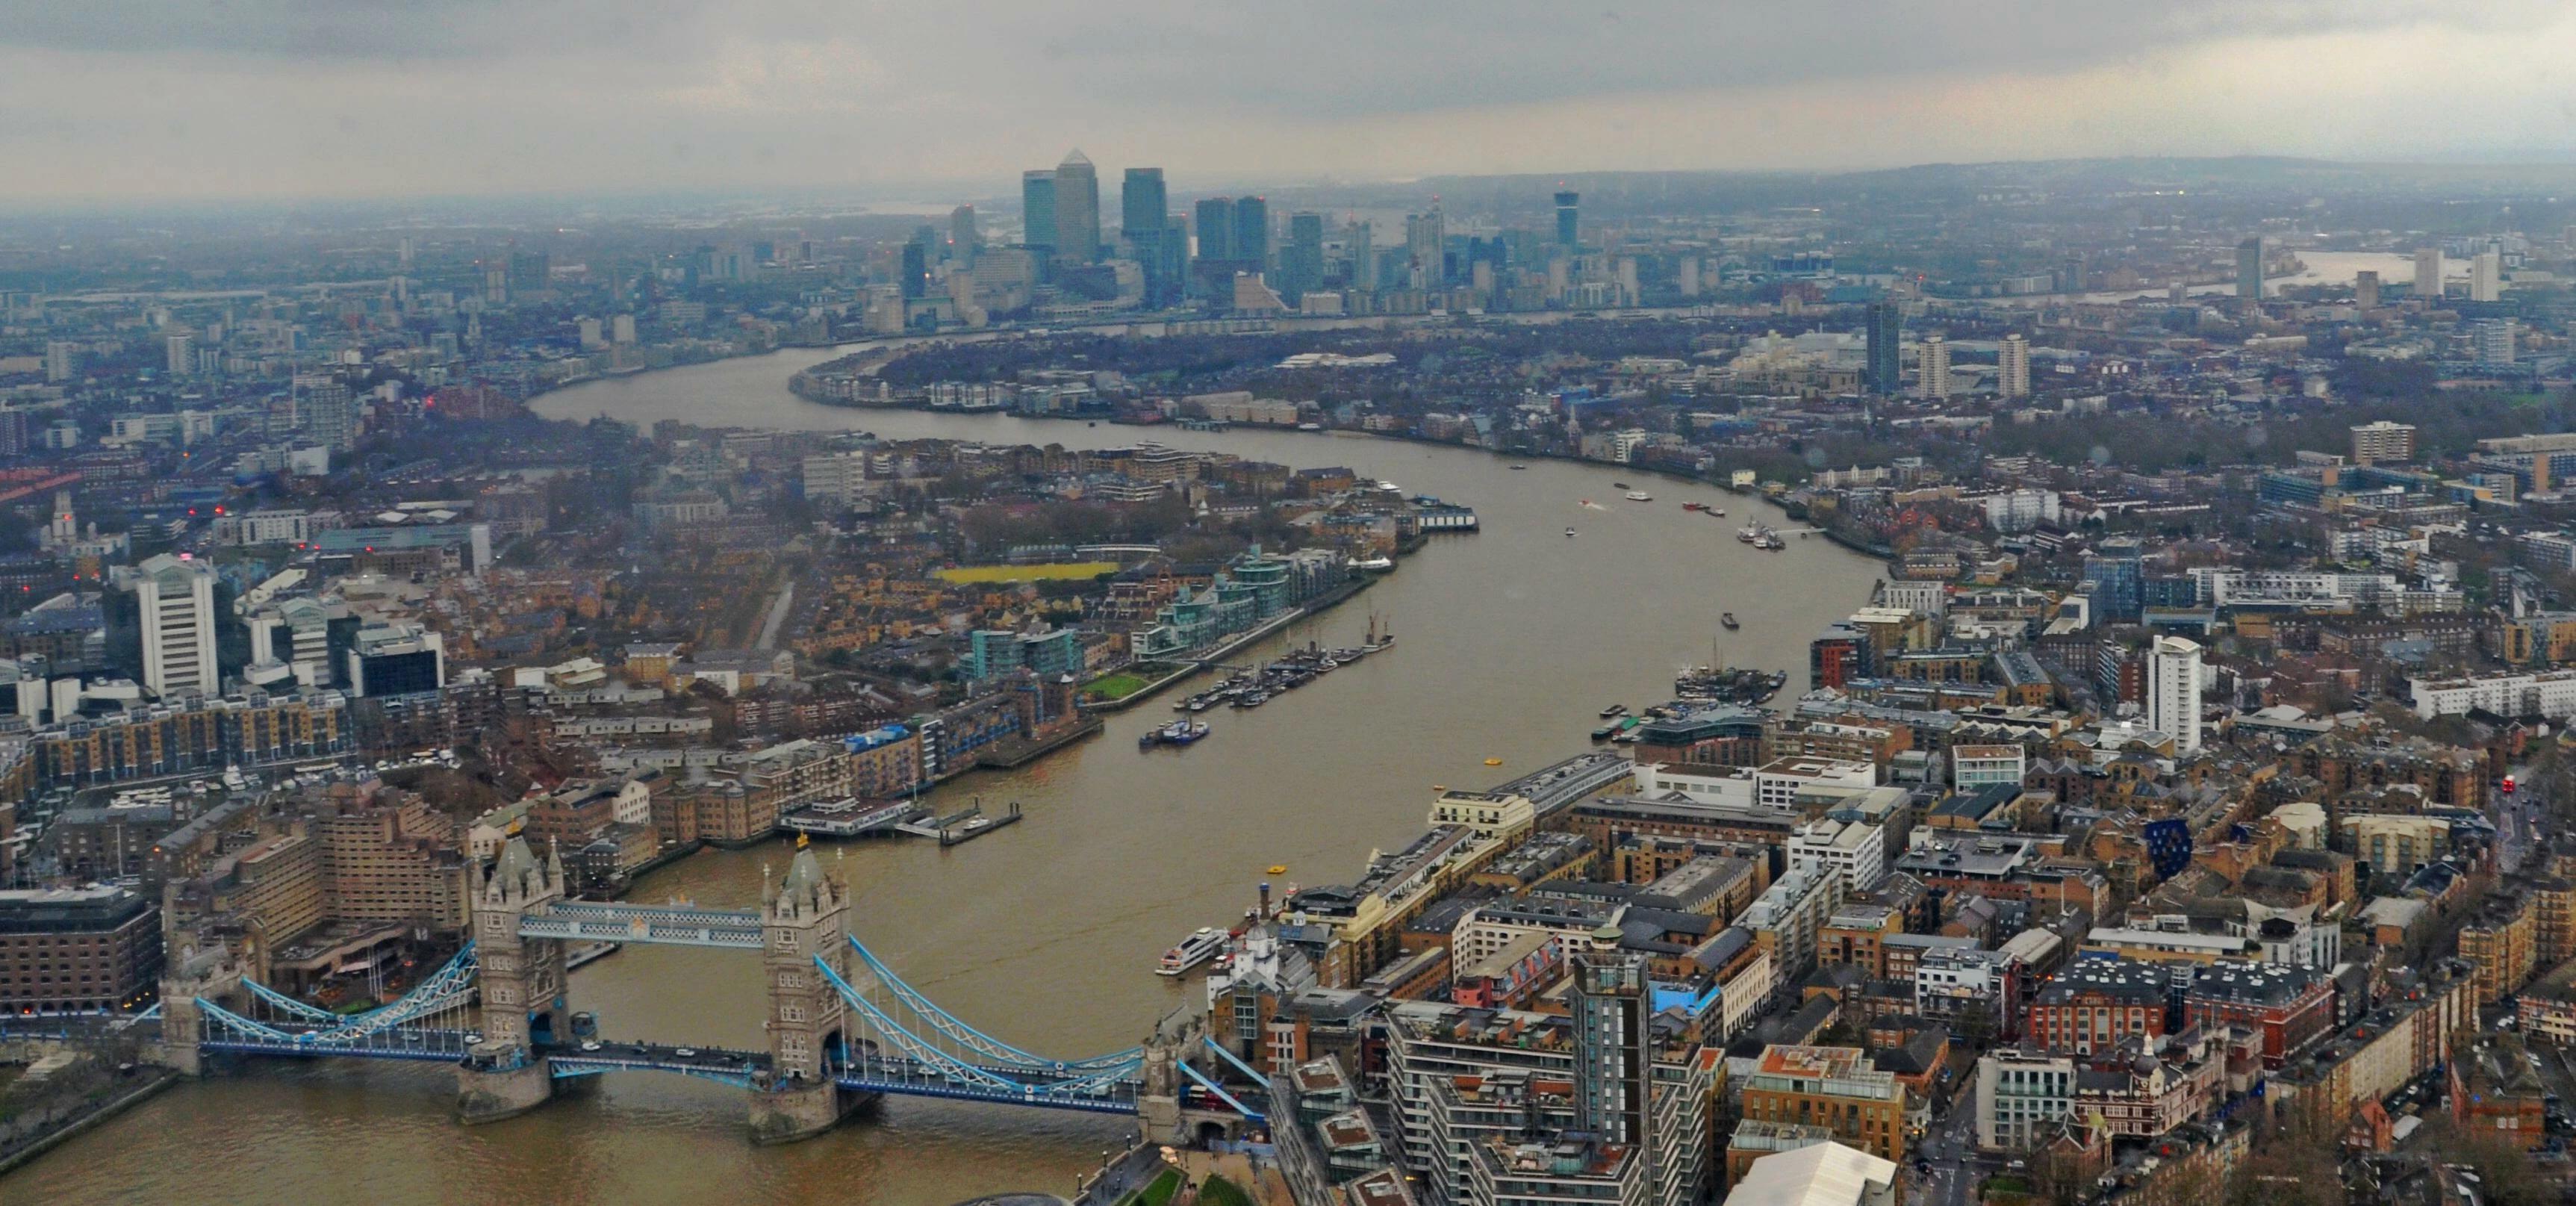 The Thames. from the Shard